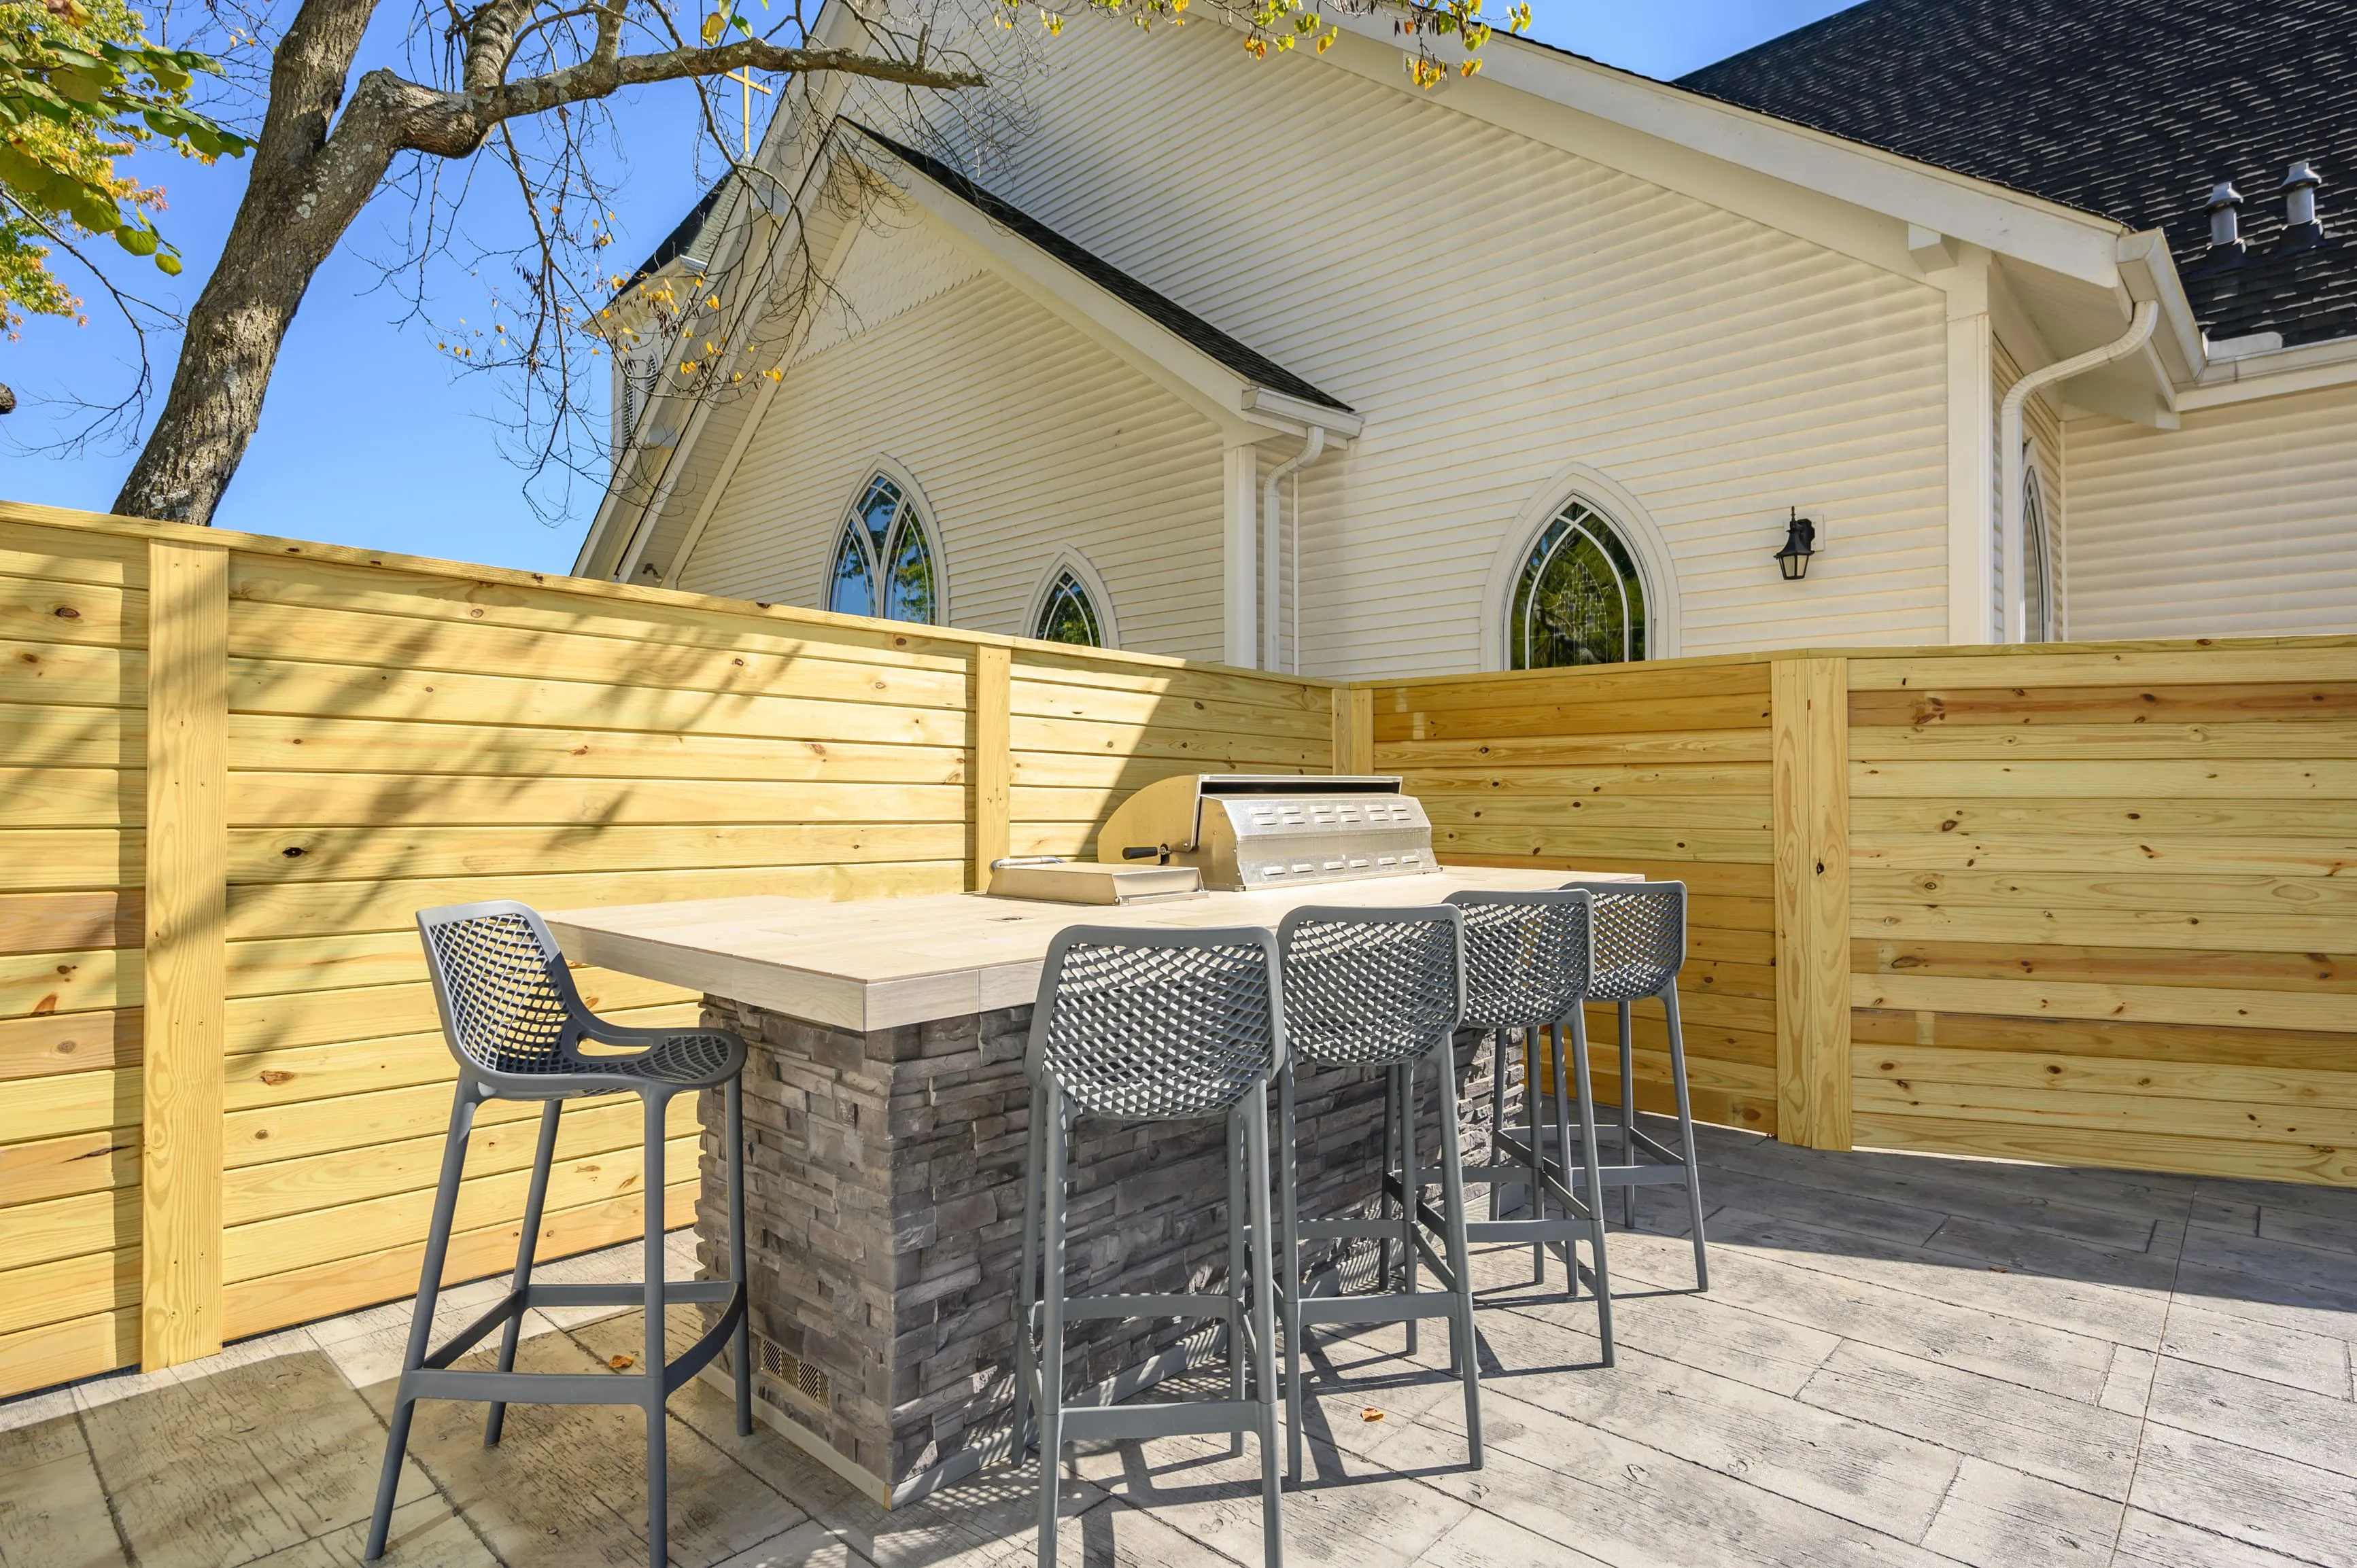 Outdoor patio with a stone bar and high stools next to a wooden privacy fence with a partial view of a church in the background.